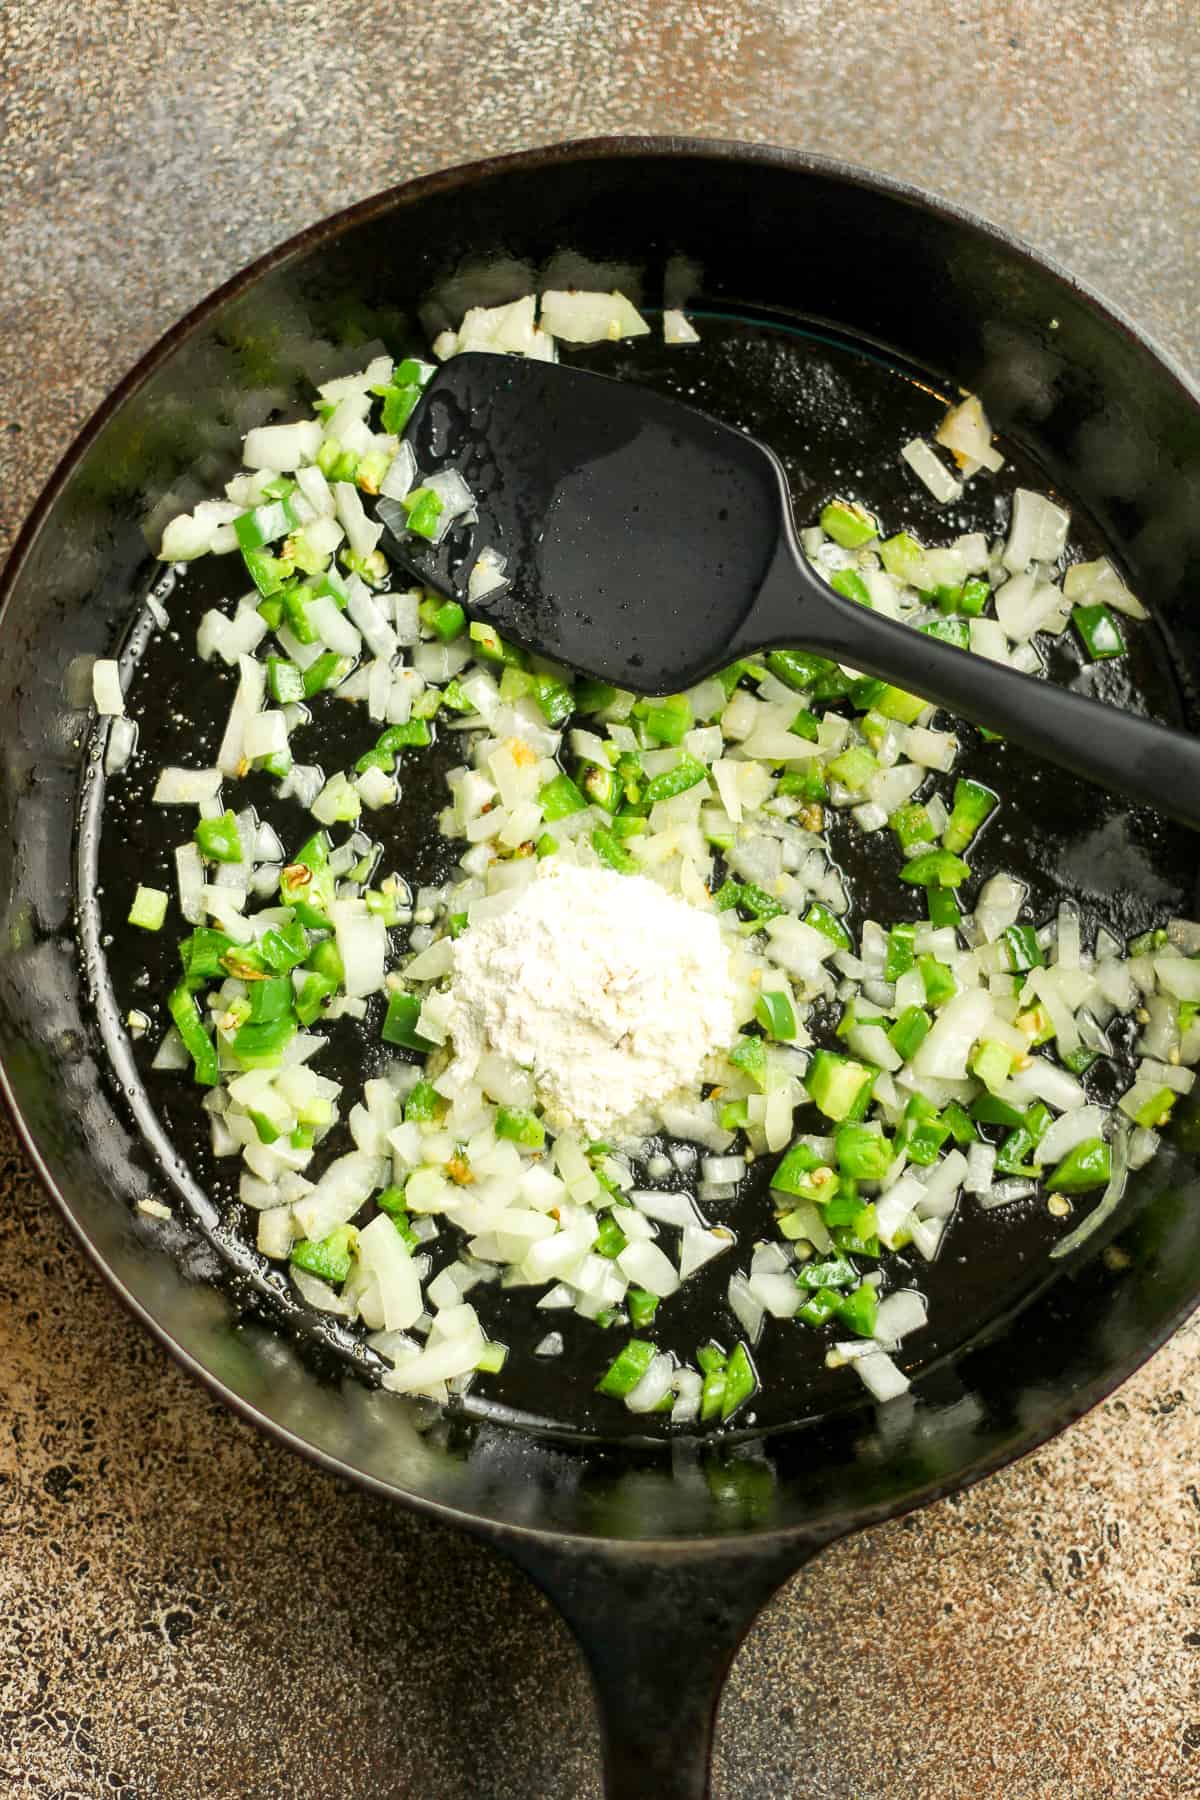 A skillet of the sautéed onions and jalapeños, with a tablespoon of flour on top.